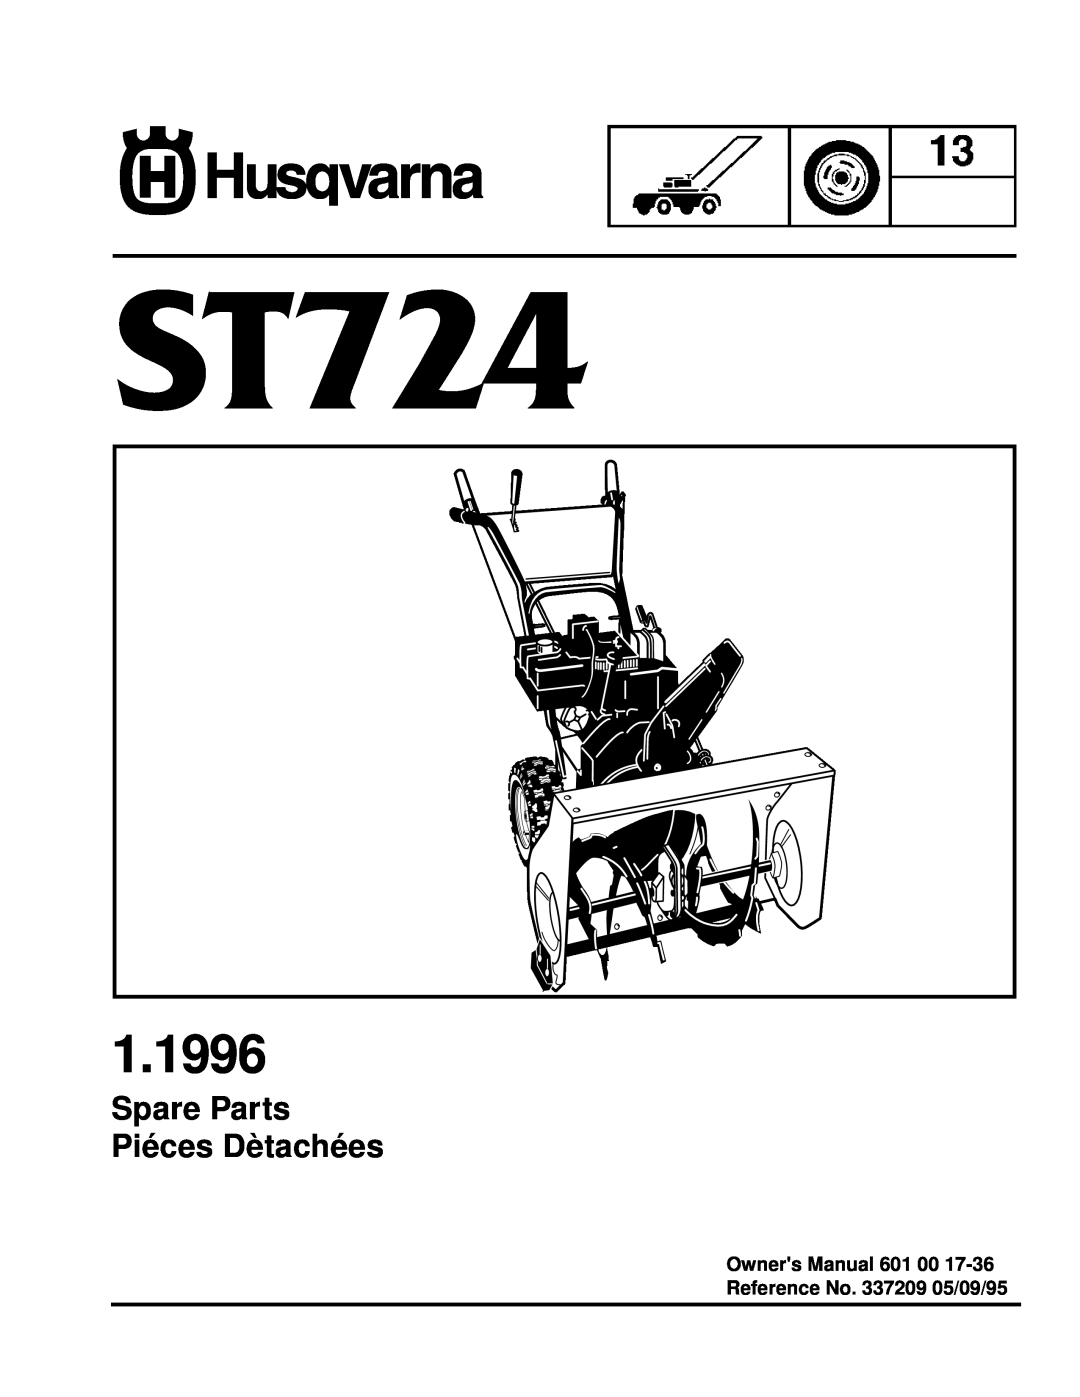 Husqvarna ST724 owner manual 1.1996, Spare Parts Piéces Dètachées, Owners Manual 601 00, Reference No. 337209 05/09/95 